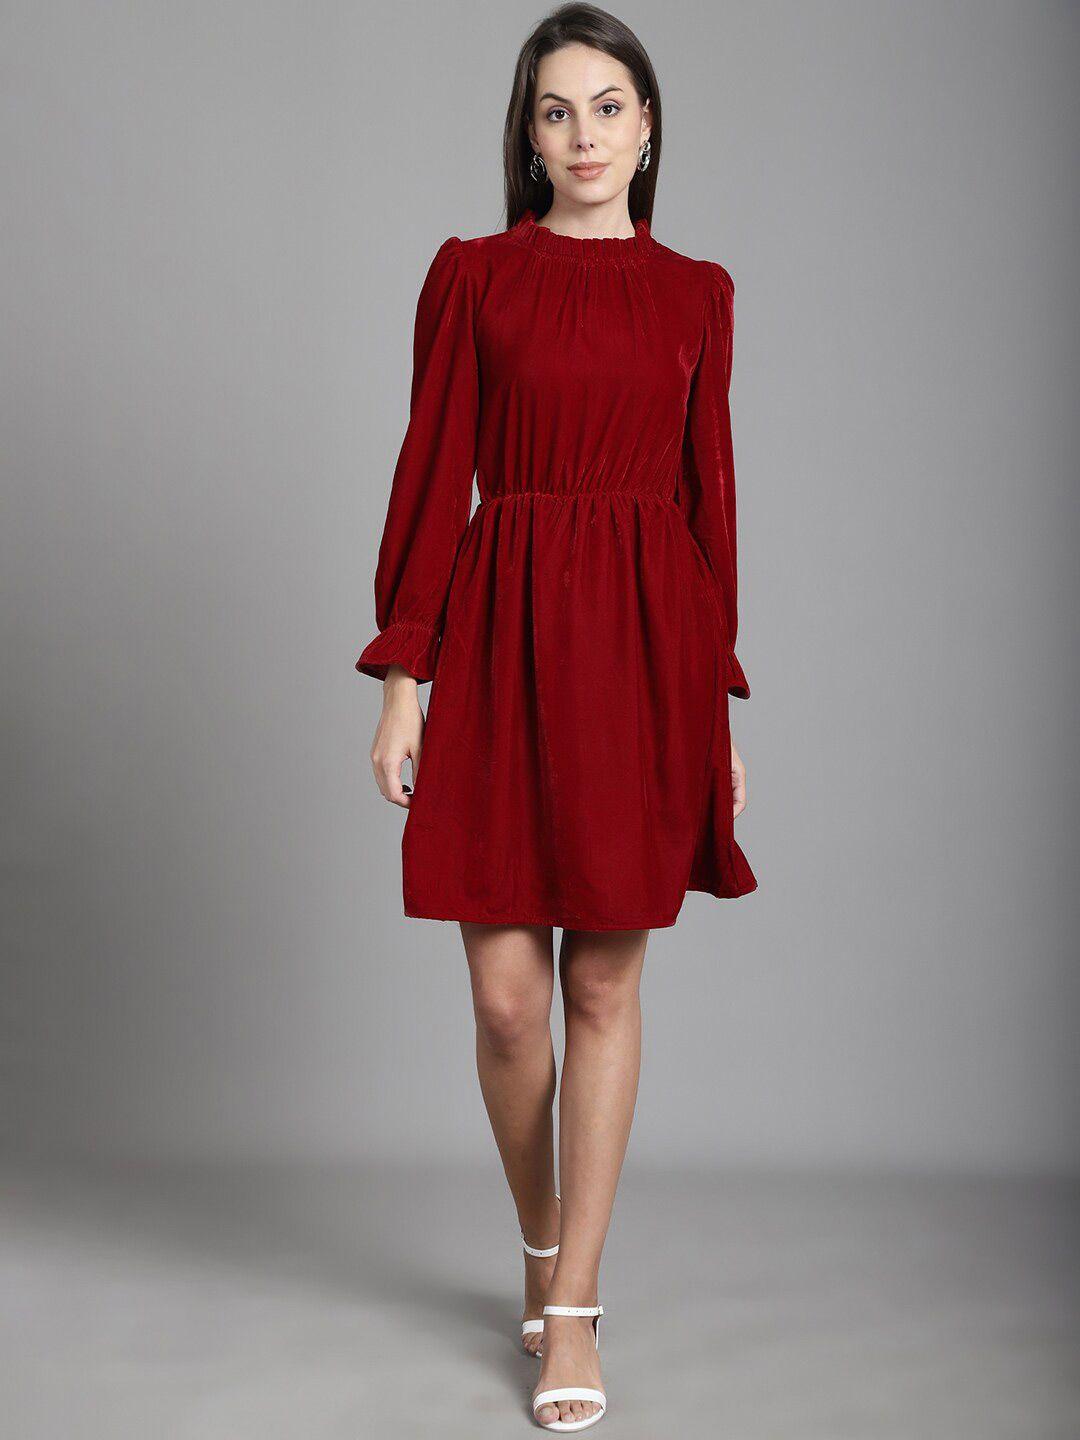 marc louis puff sleeves gathered or pleated a line dress